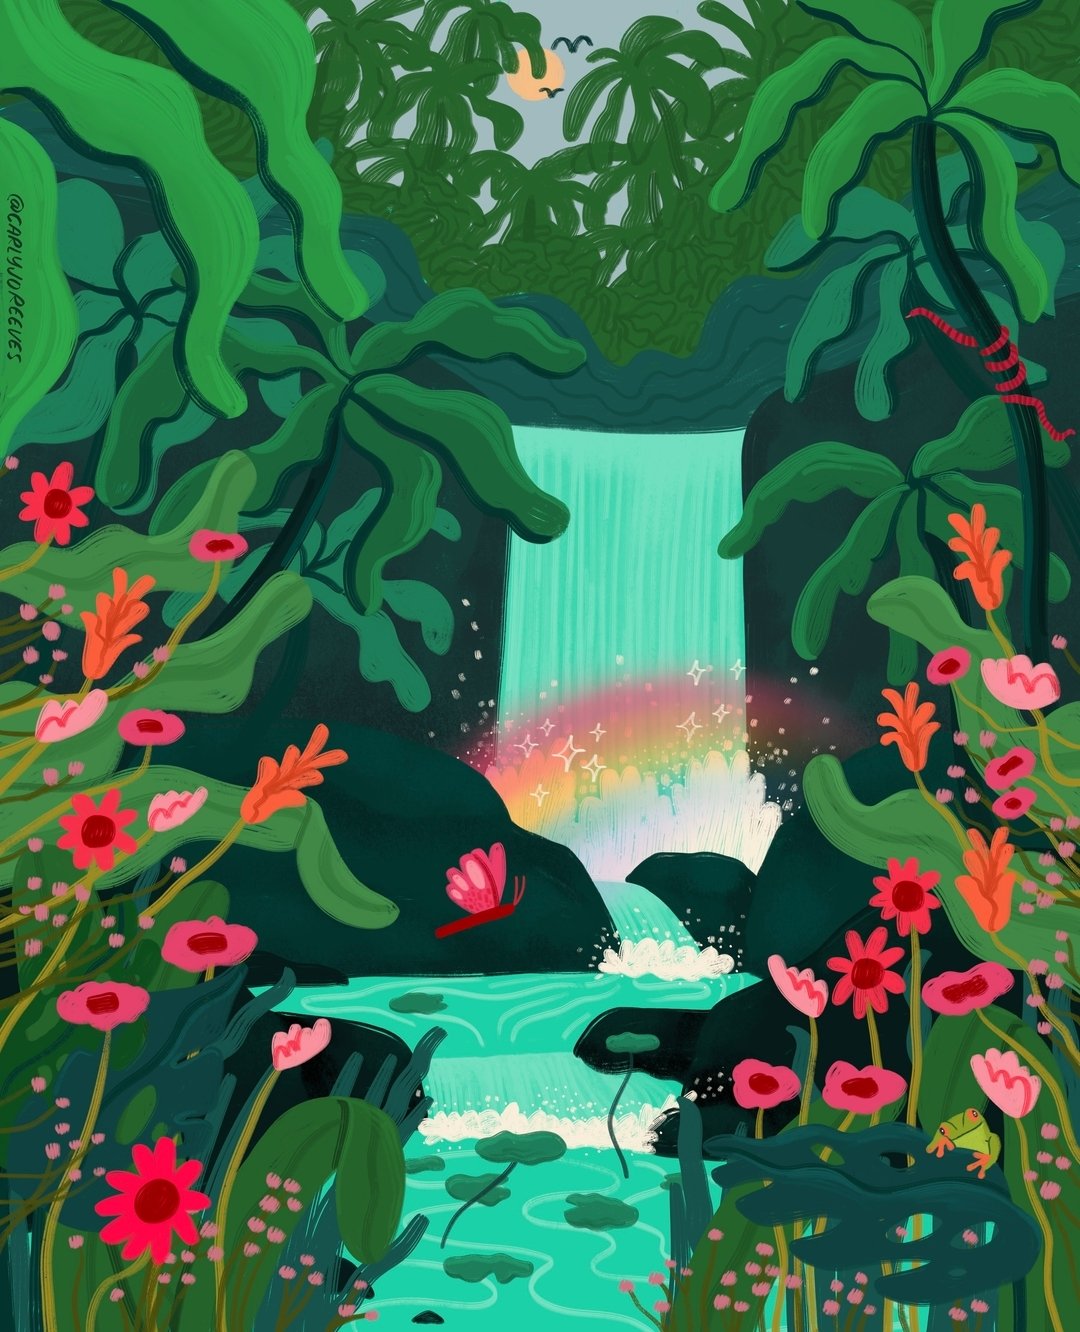 Drawing this made me feel like a kid. I got into such a flow with it! ✨🌺🌴

Living with the Land: Rainforest
#livingland2024
Hosted by
@jag.ink
@thewildpeachstudio

#drawingchallenge #earthmonth #illustration #artistsoninstagram #earthdayeveryday #e